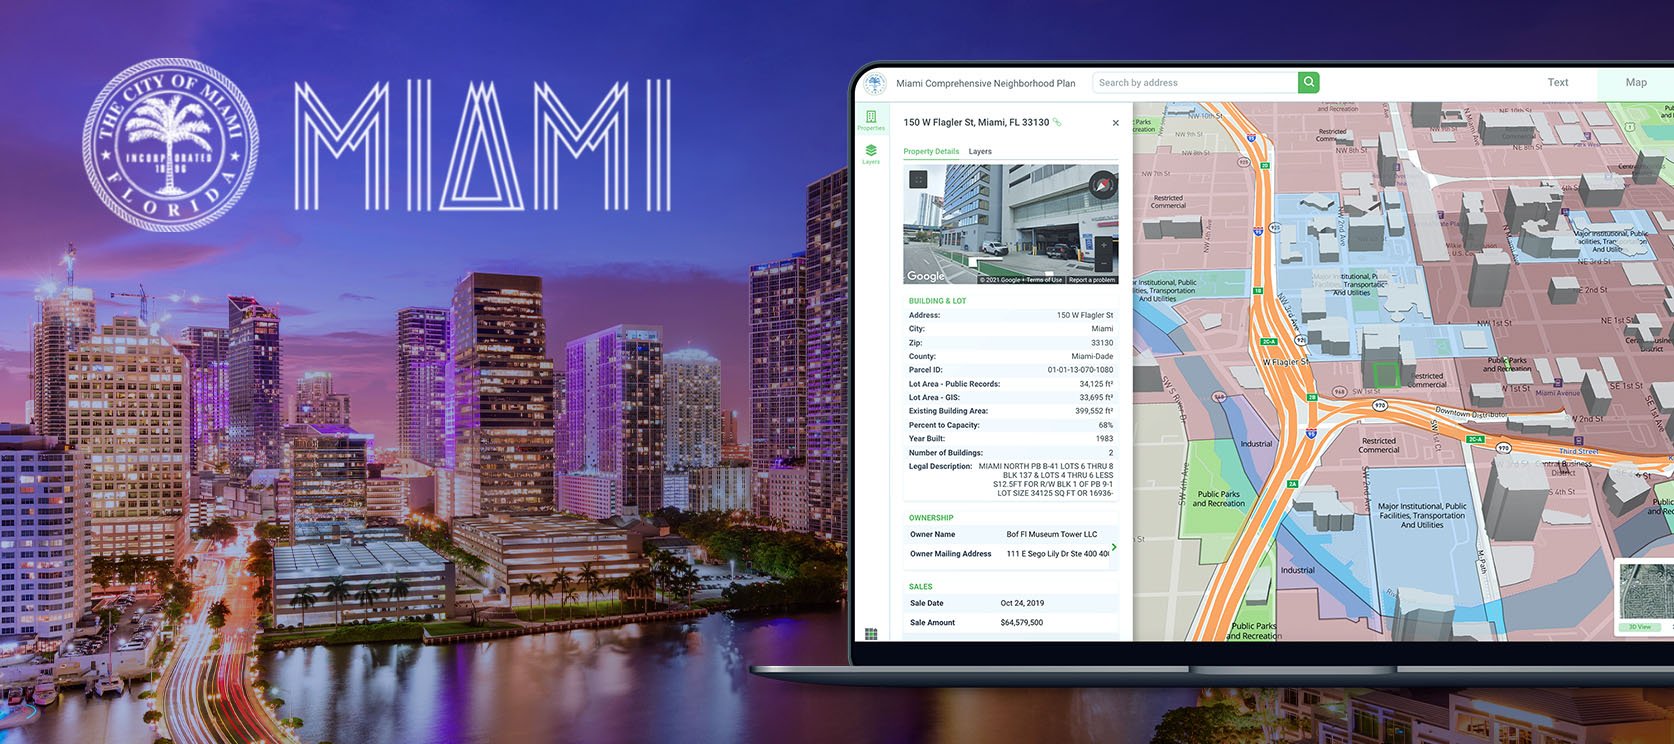 The City of Miami Gives Easy Online Access to Miami Comprehensive Neighborhood Plan With Gridics